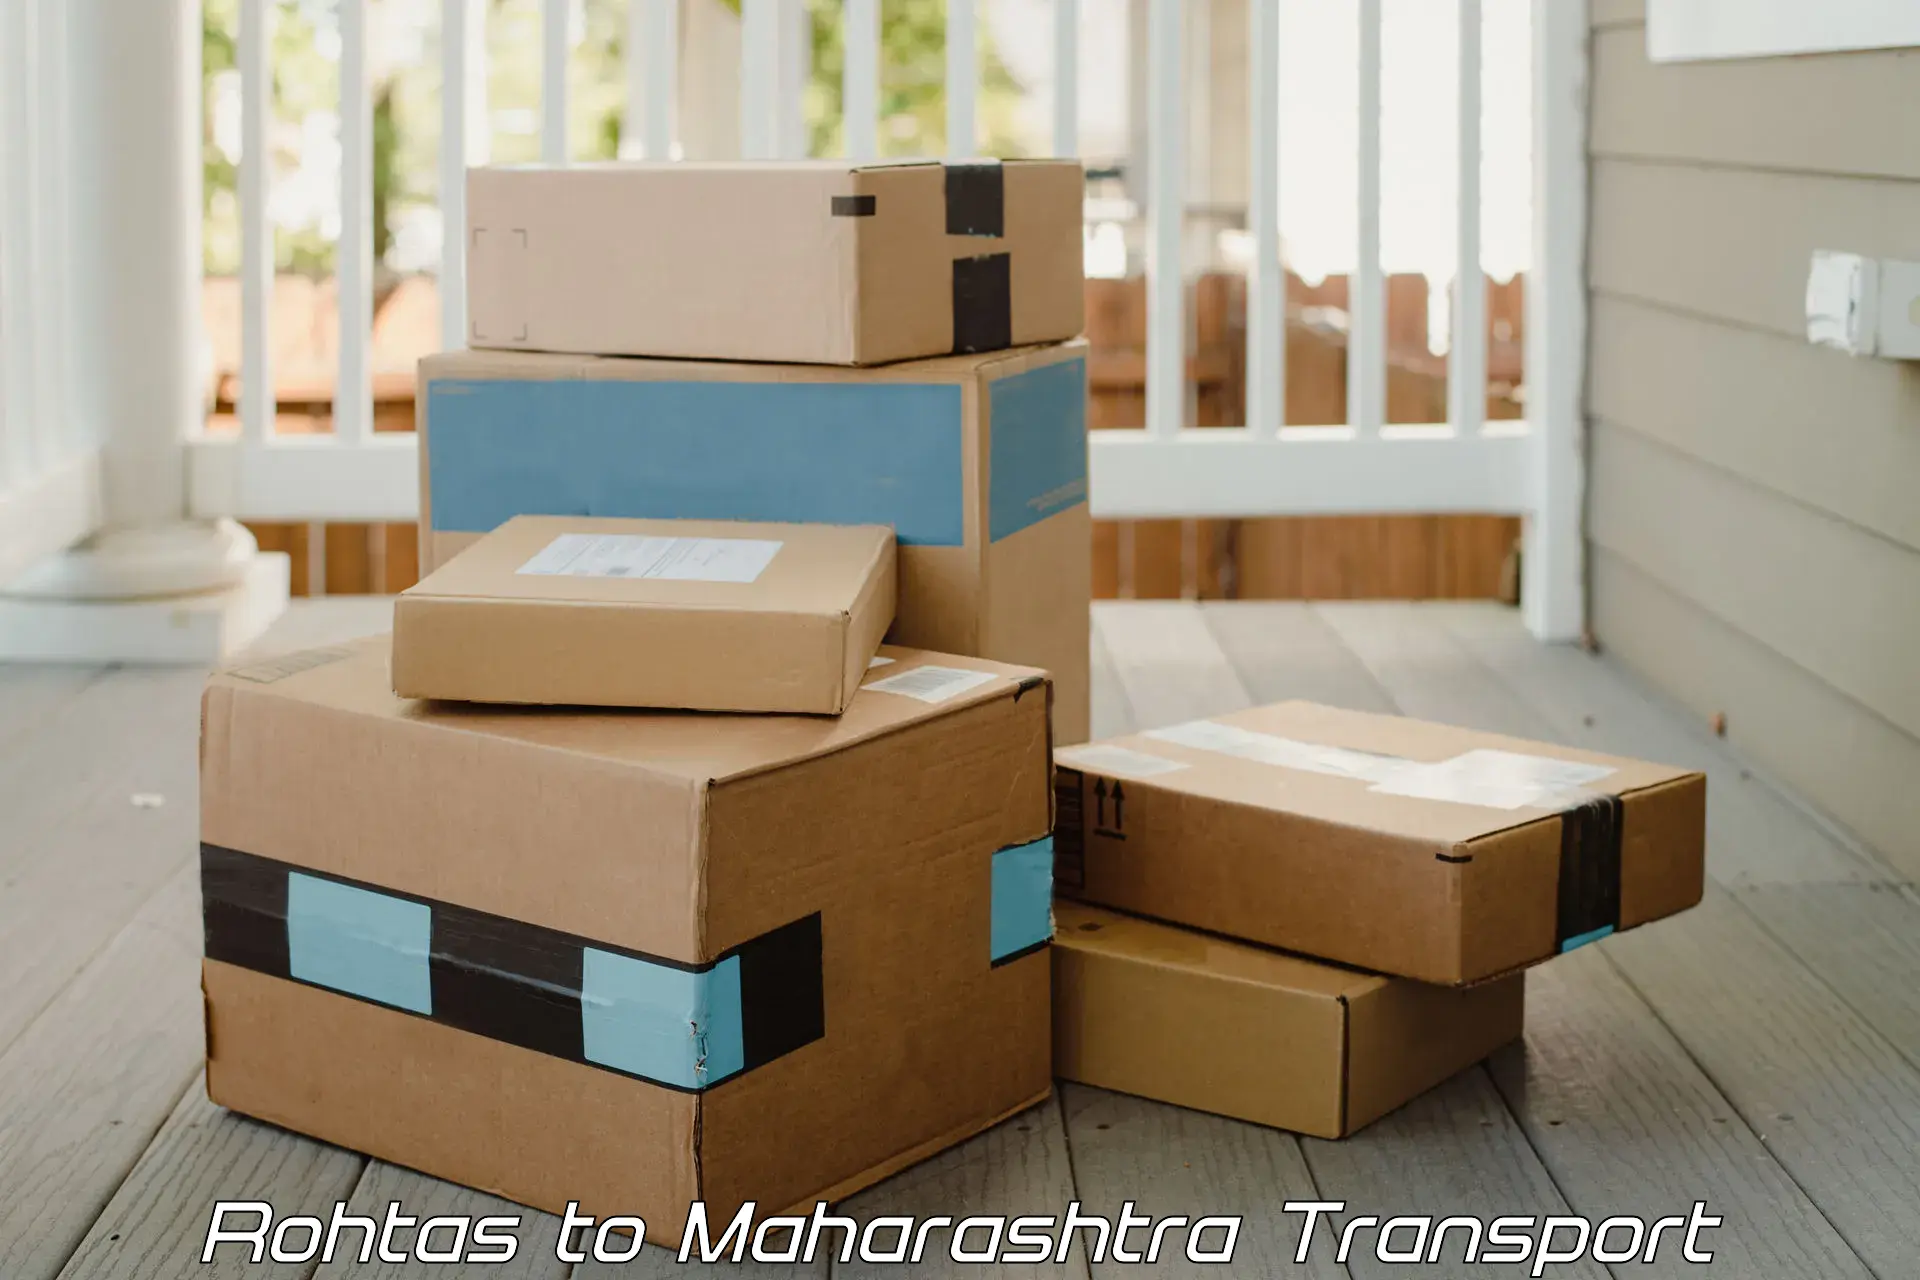 Commercial transport service Rohtas to Solapur